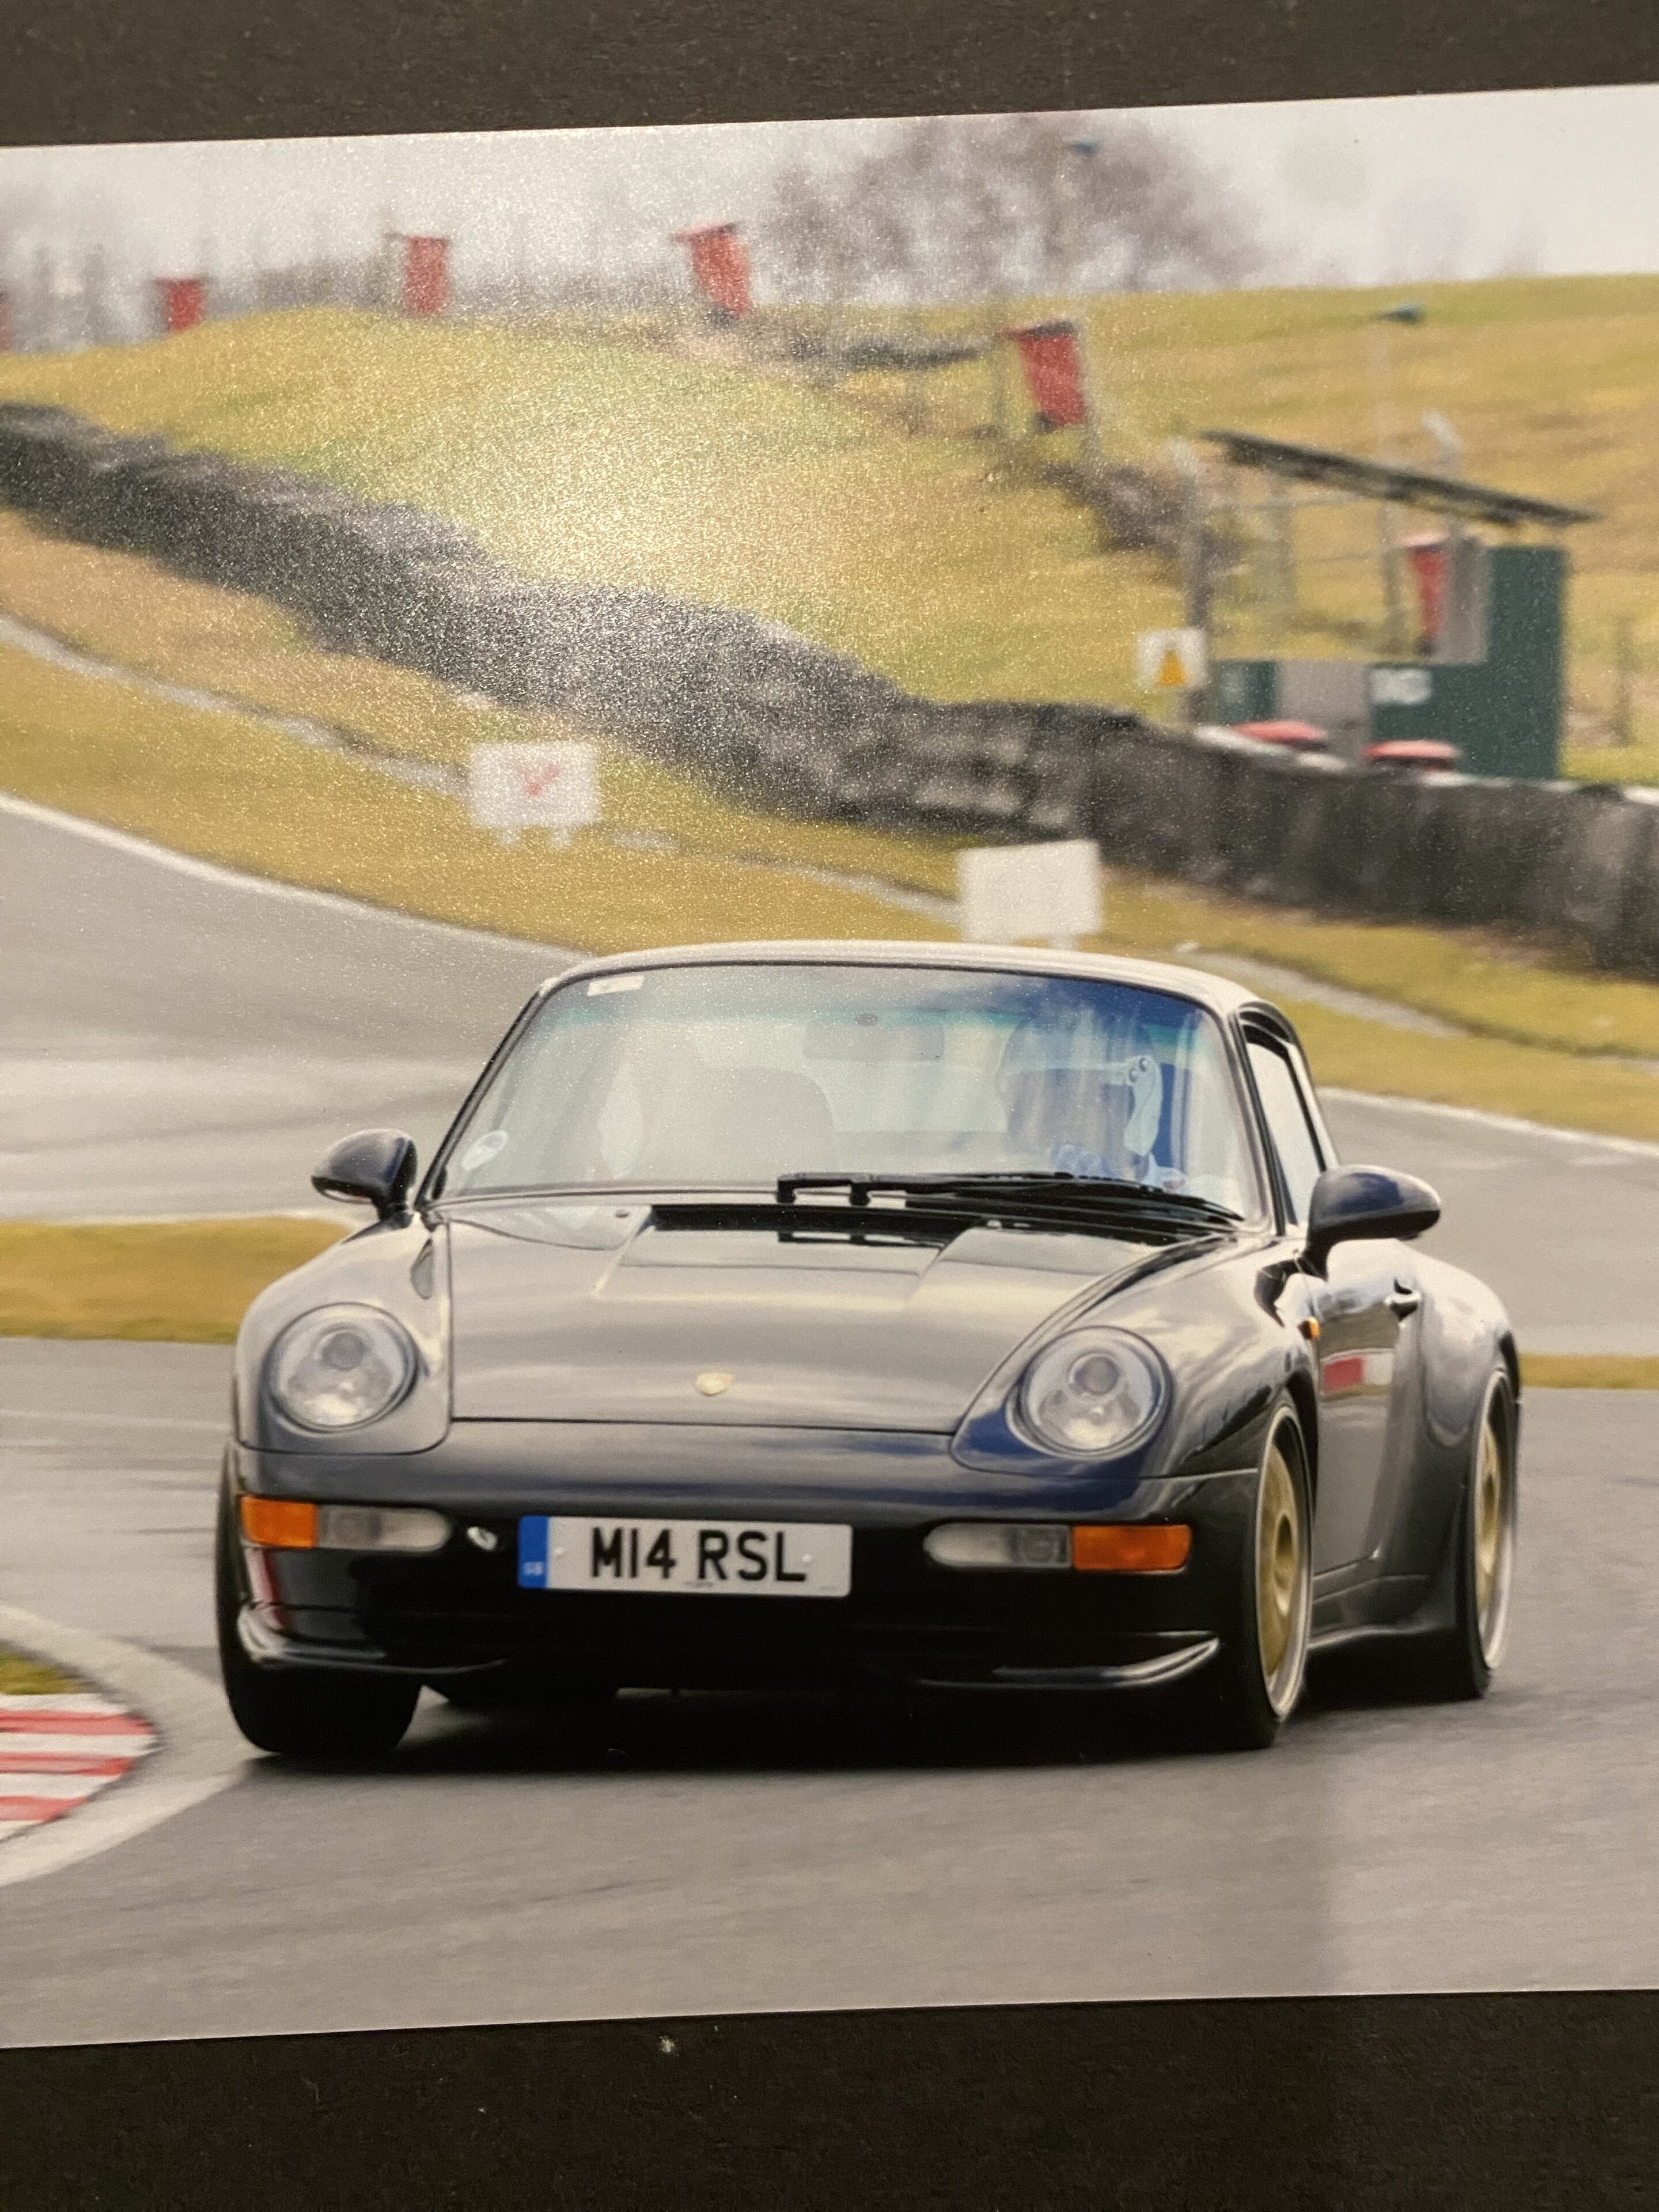 993 rs lightweight or clubsport - Page 9 - Porsche General - PistonHeads UK - The image displays a photograph of a racing car on a track. The vehicle is a Porsche, identifiable by its iconic design and the number "49" visible on the side. It's a sports car modeled as a GT3RS, equipped with a large rear wing for aerodynamic downforce. The car has the standard racing livery with sponsor logos, including "Pirelli," which is displayed prominently along the side of the vehicle. The track setting includes barriers and signs that are typical for motorsport events. The photo appears to be taken from an elevated angle, capturing a sense of motion as if the car is in the process of lapping the track.